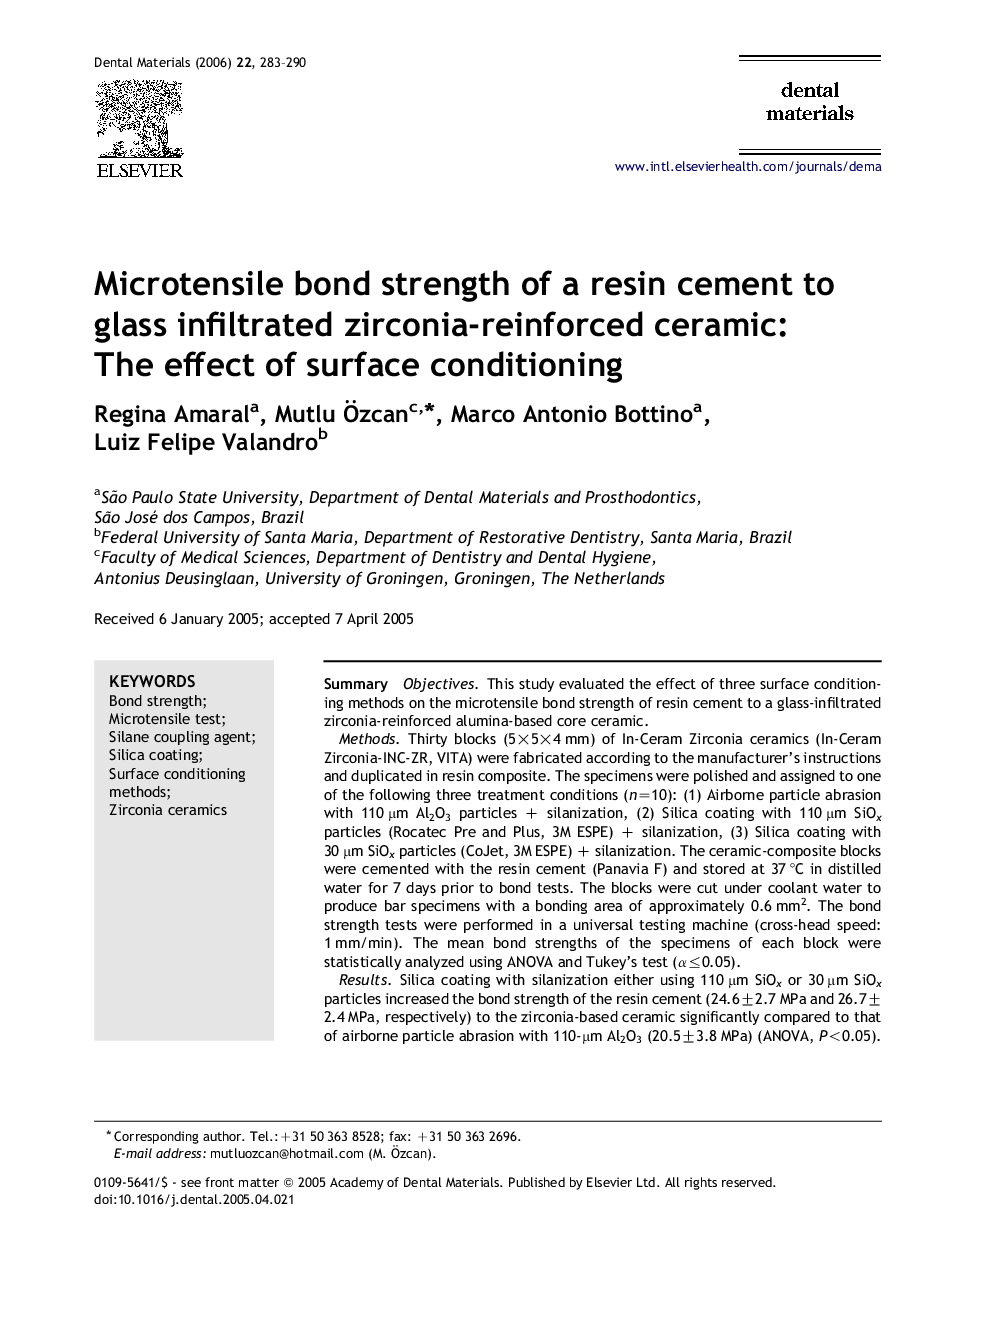 Microtensile bond strength of a resin cement to glass infiltrated zirconia-reinforced ceramic: The effect of surface conditioning